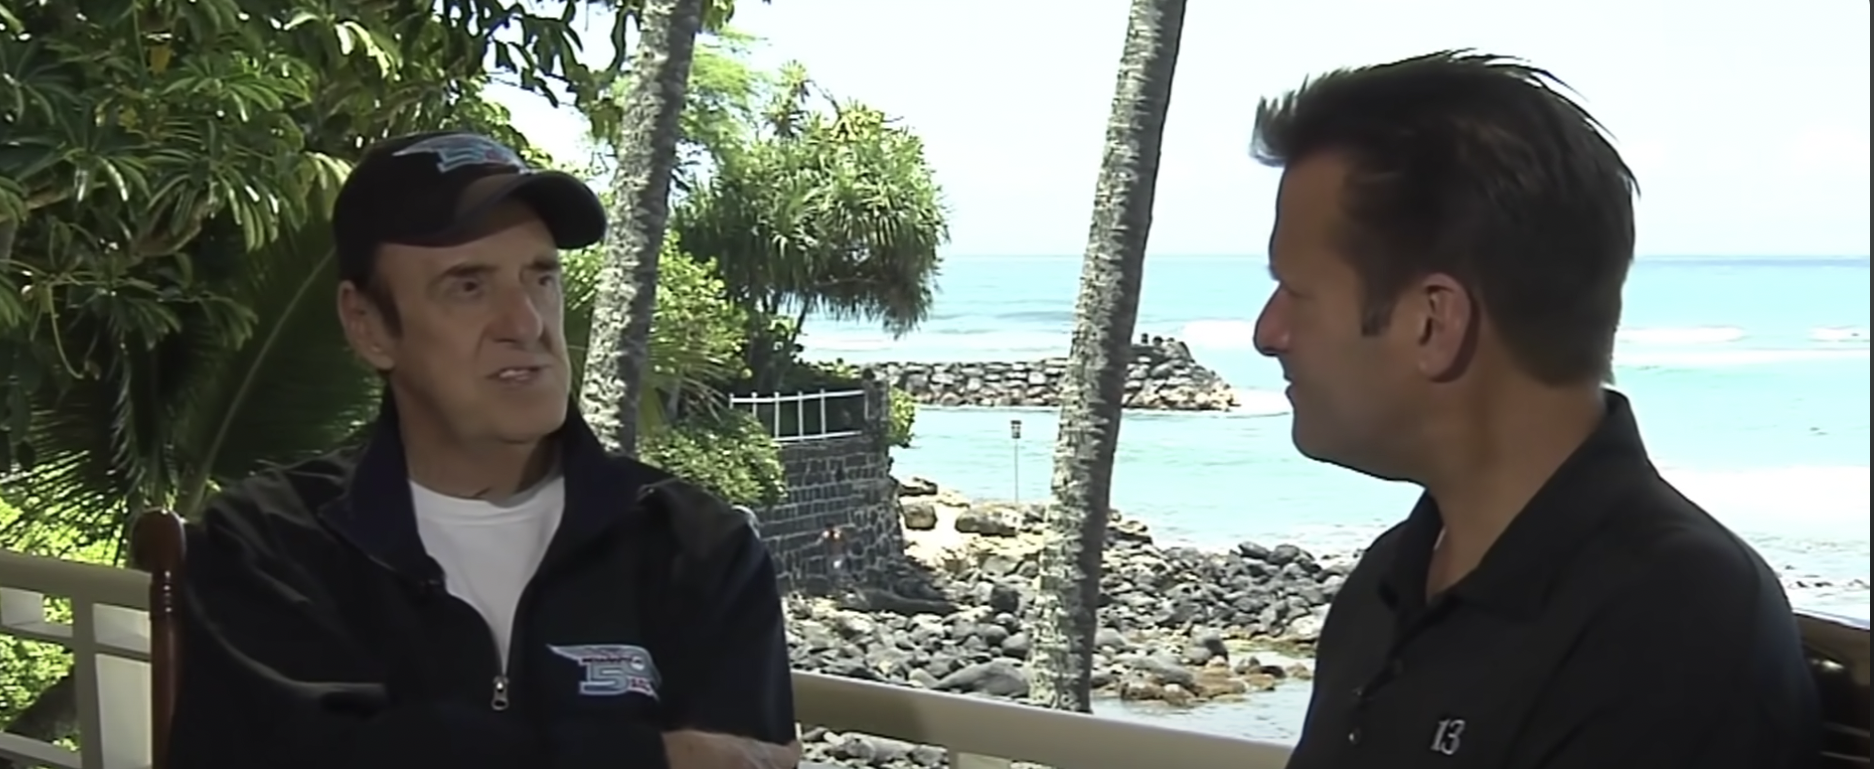 Jim Nabors and the WTHR News Sports interviewer in his Hawaii home | Source: youtube.com/@WTHR13News